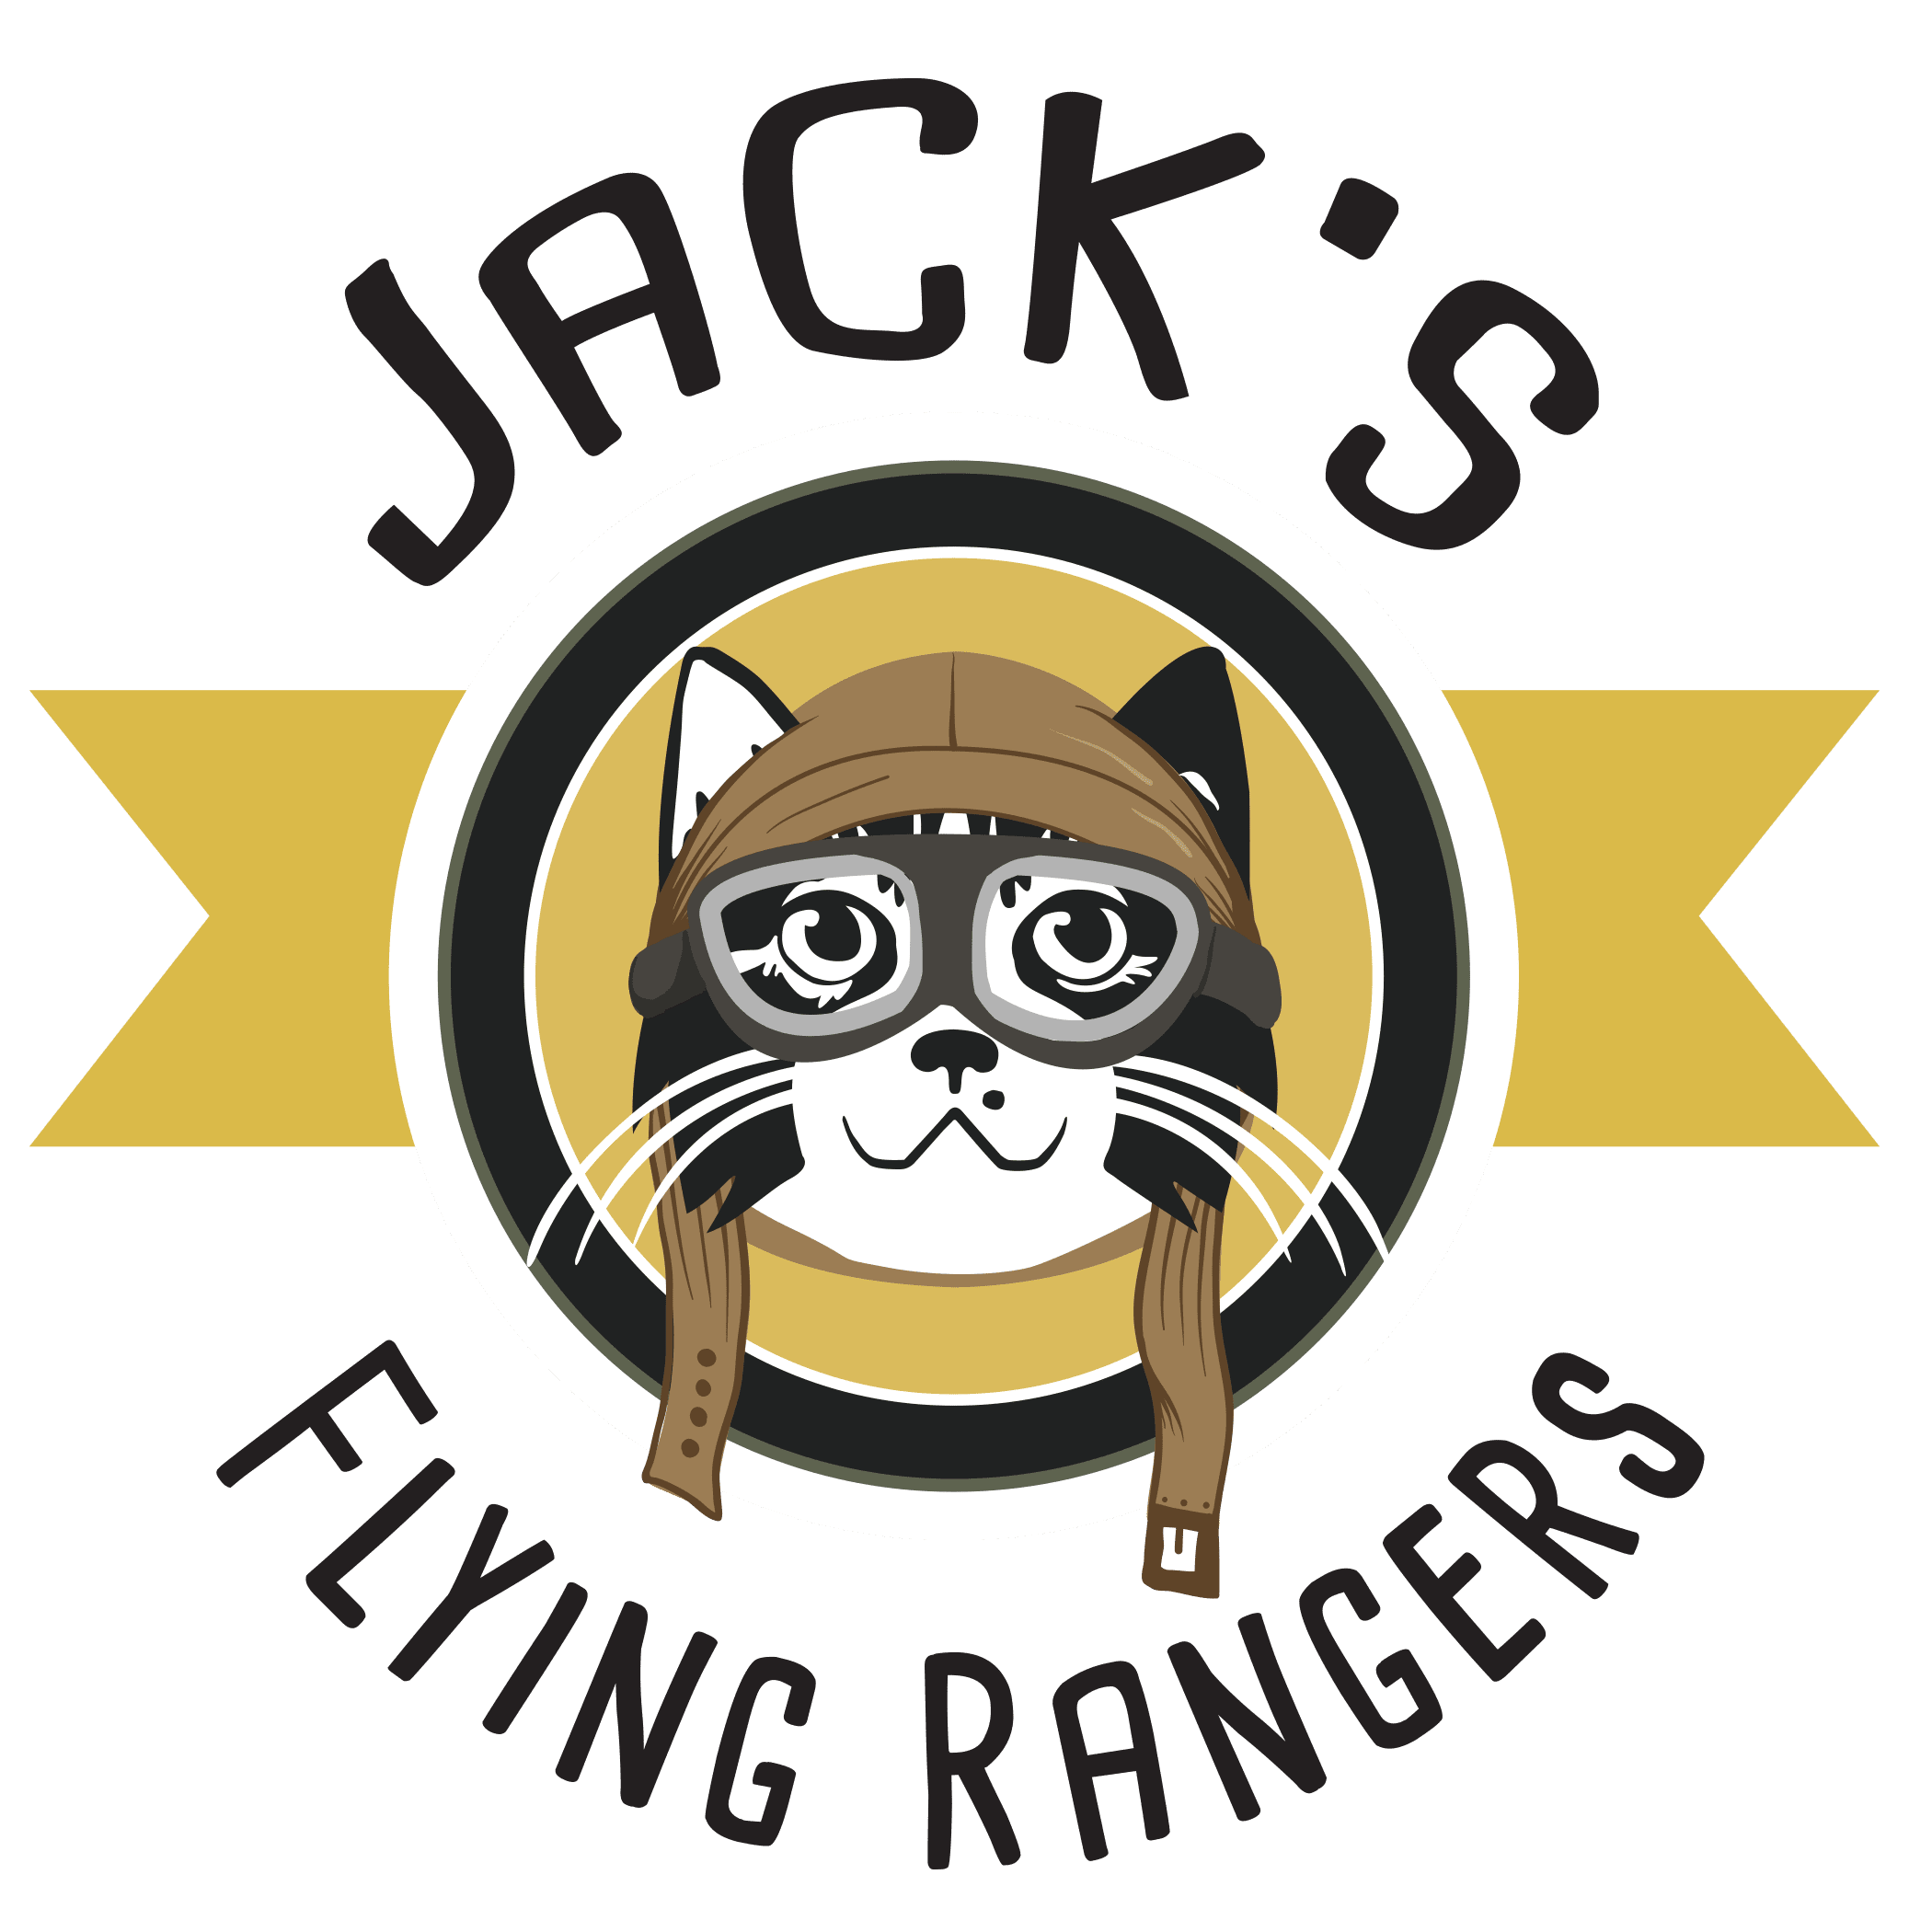 You are currently viewing Jack’s Flying Rangers: Episode 2 | Route 101 Goods